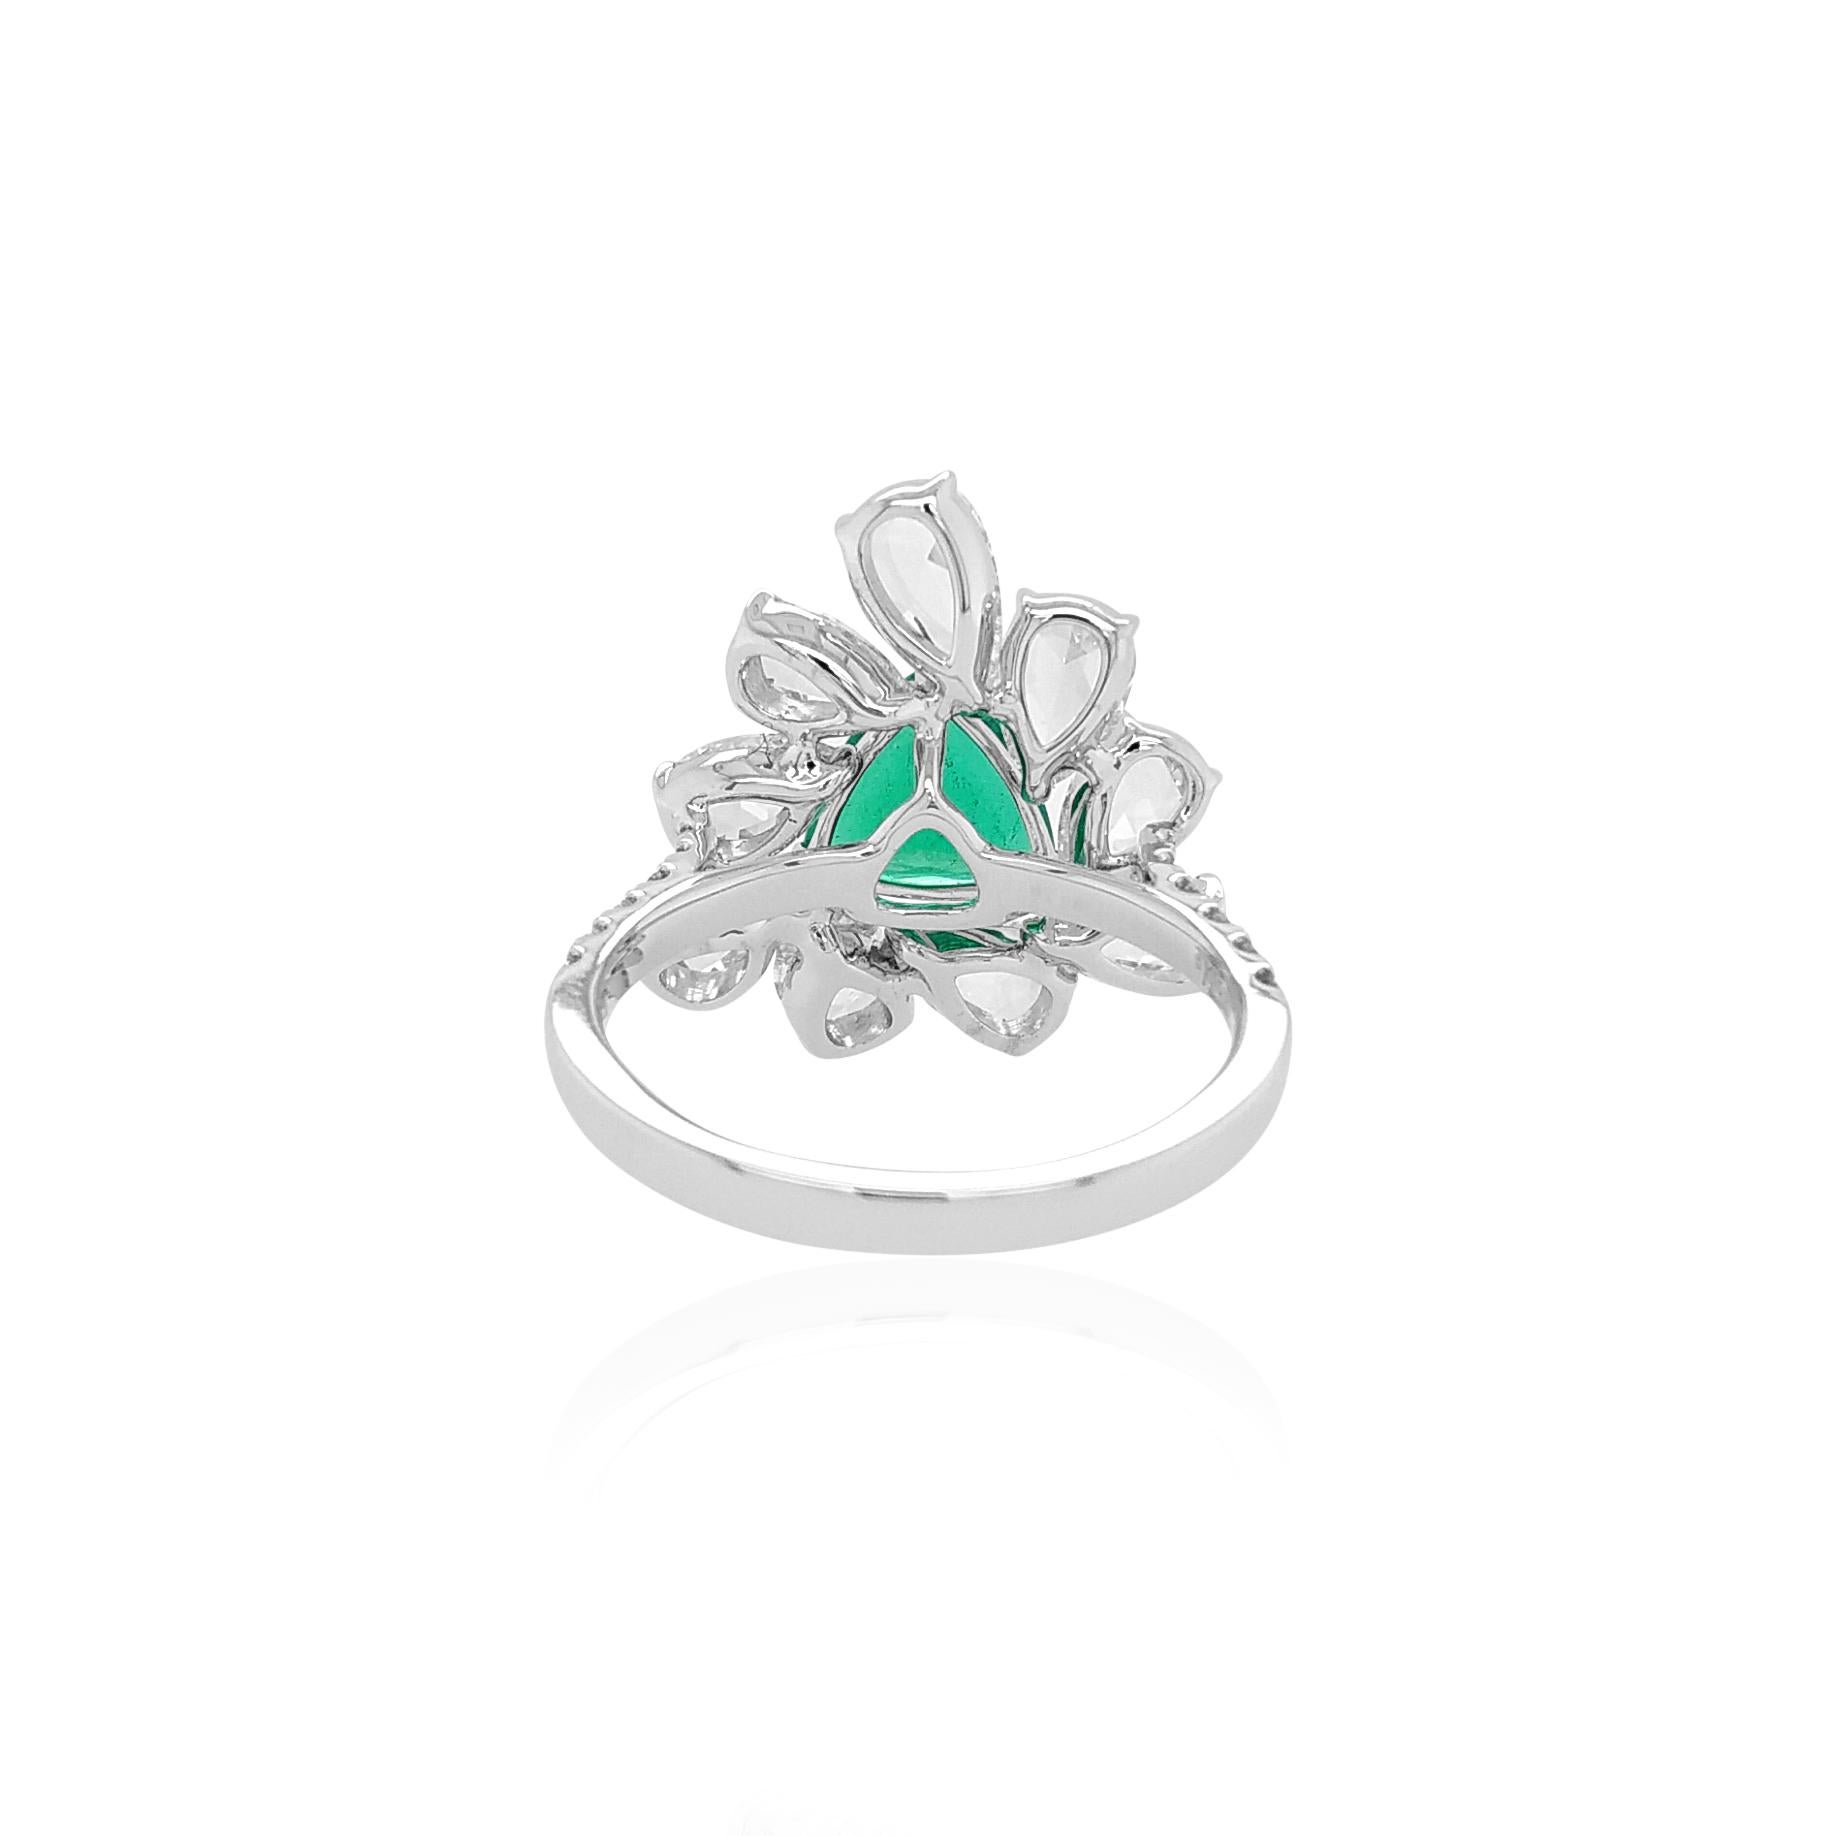 A bold statement K18 White Gold cocktail ring features a superb quality Trilliant shape Colombian Emerald at its centre, set amongst an elegant arrangement of Pear Shape Rose Cut White Diamonds halo. Unique and striking, this exceptional ring will